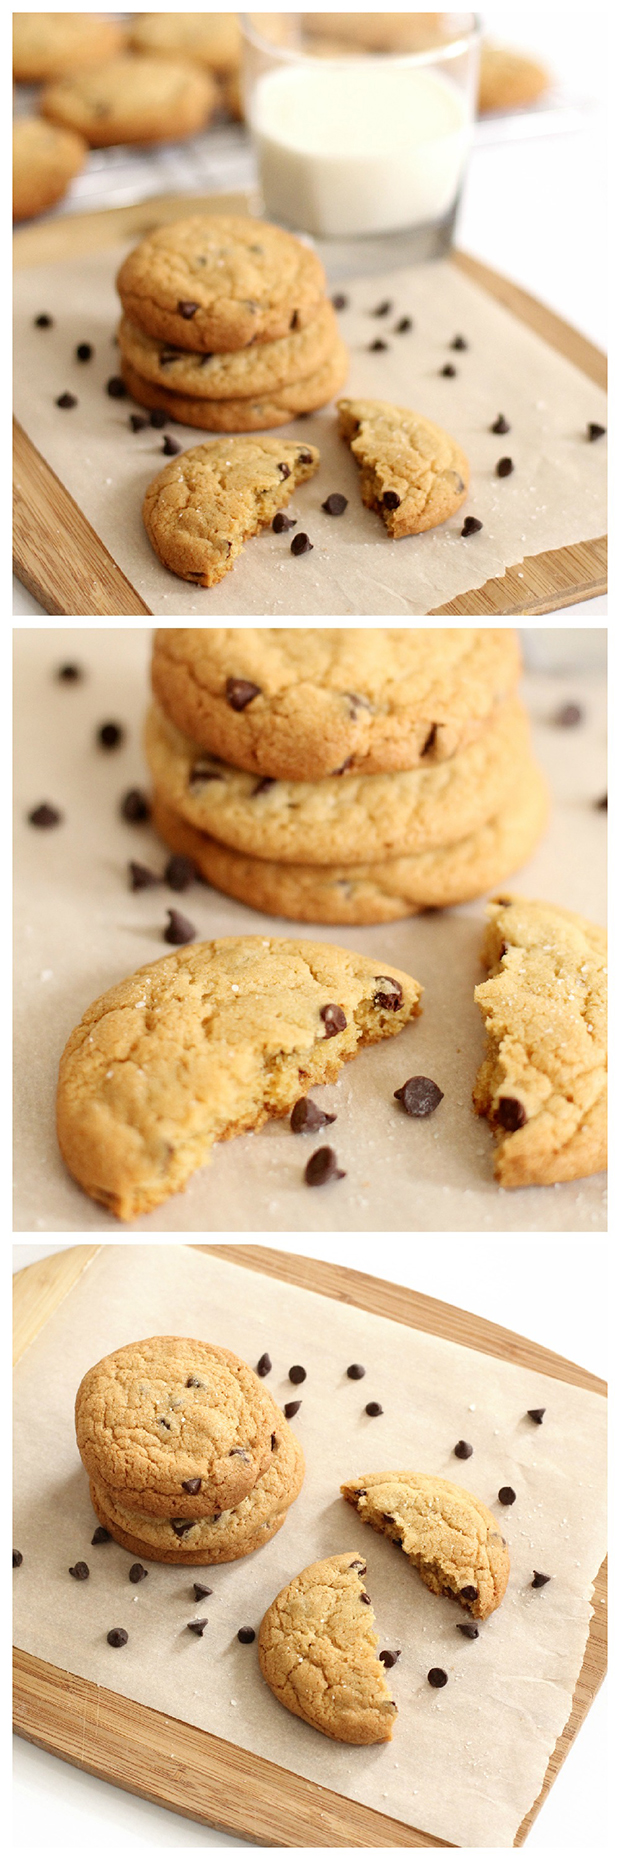 The perfect chocolate chip cookie.